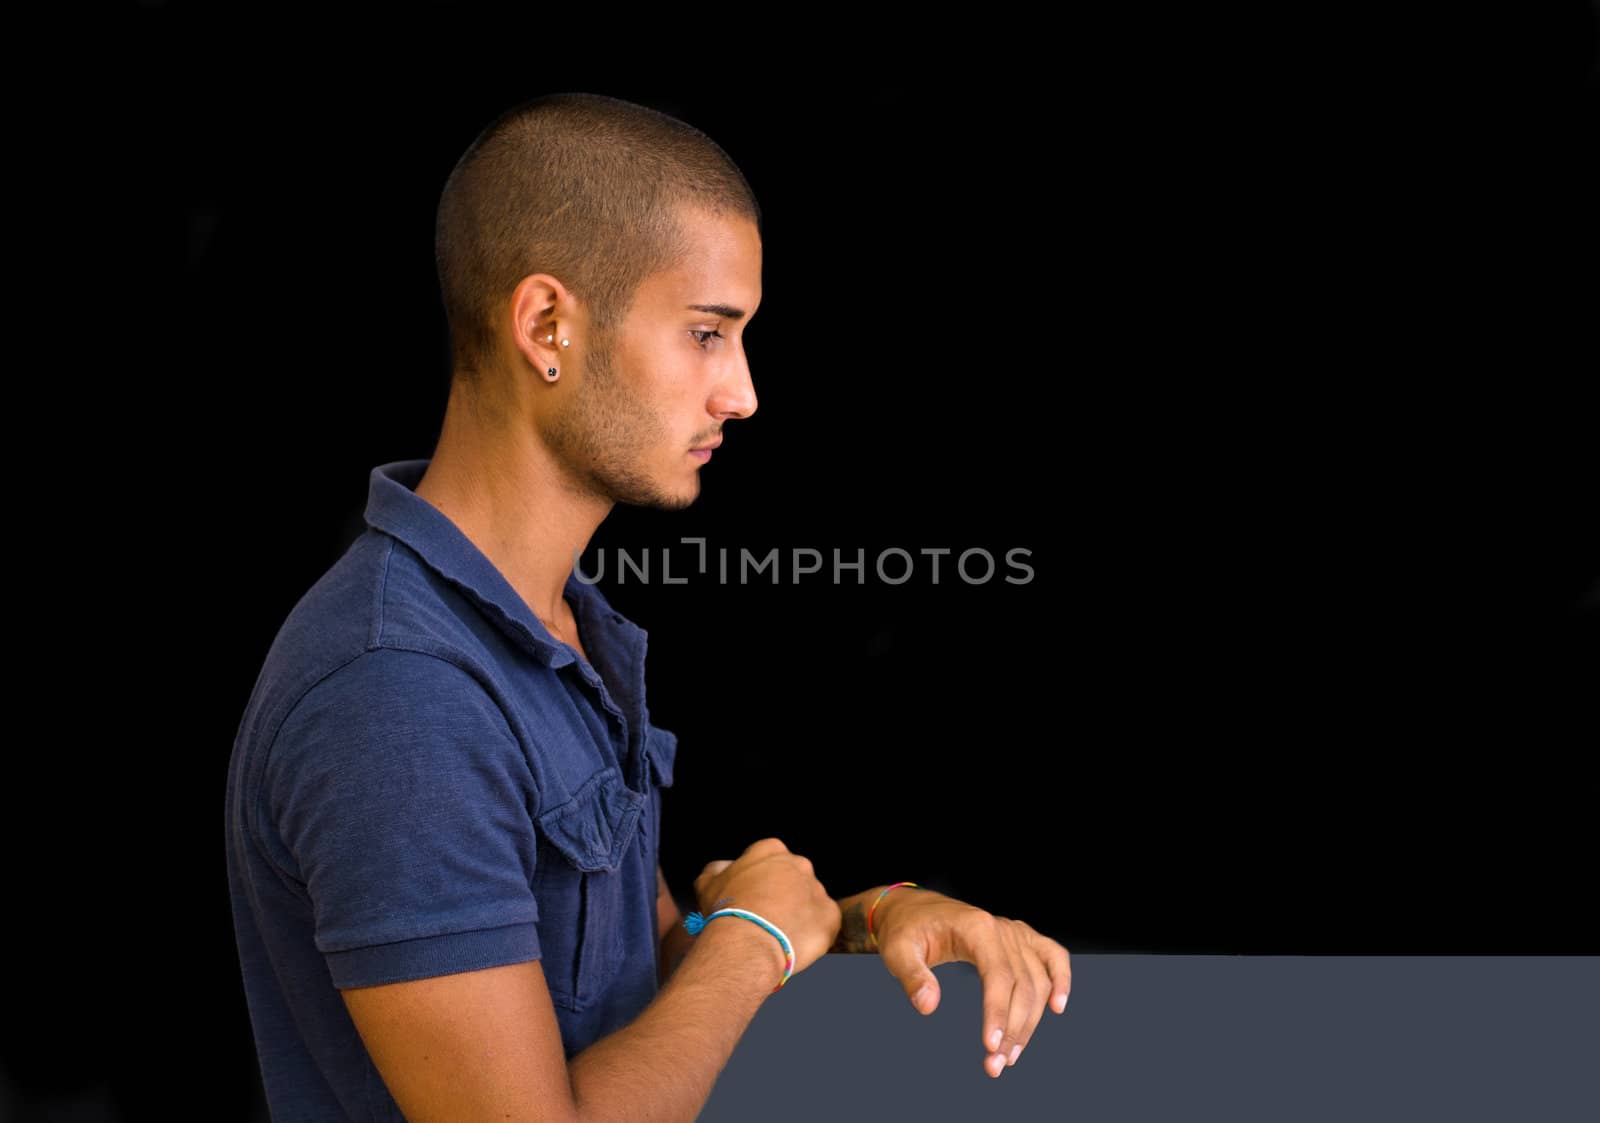 Attractive young man, side view, looking down with hands on grey board, isolated on black